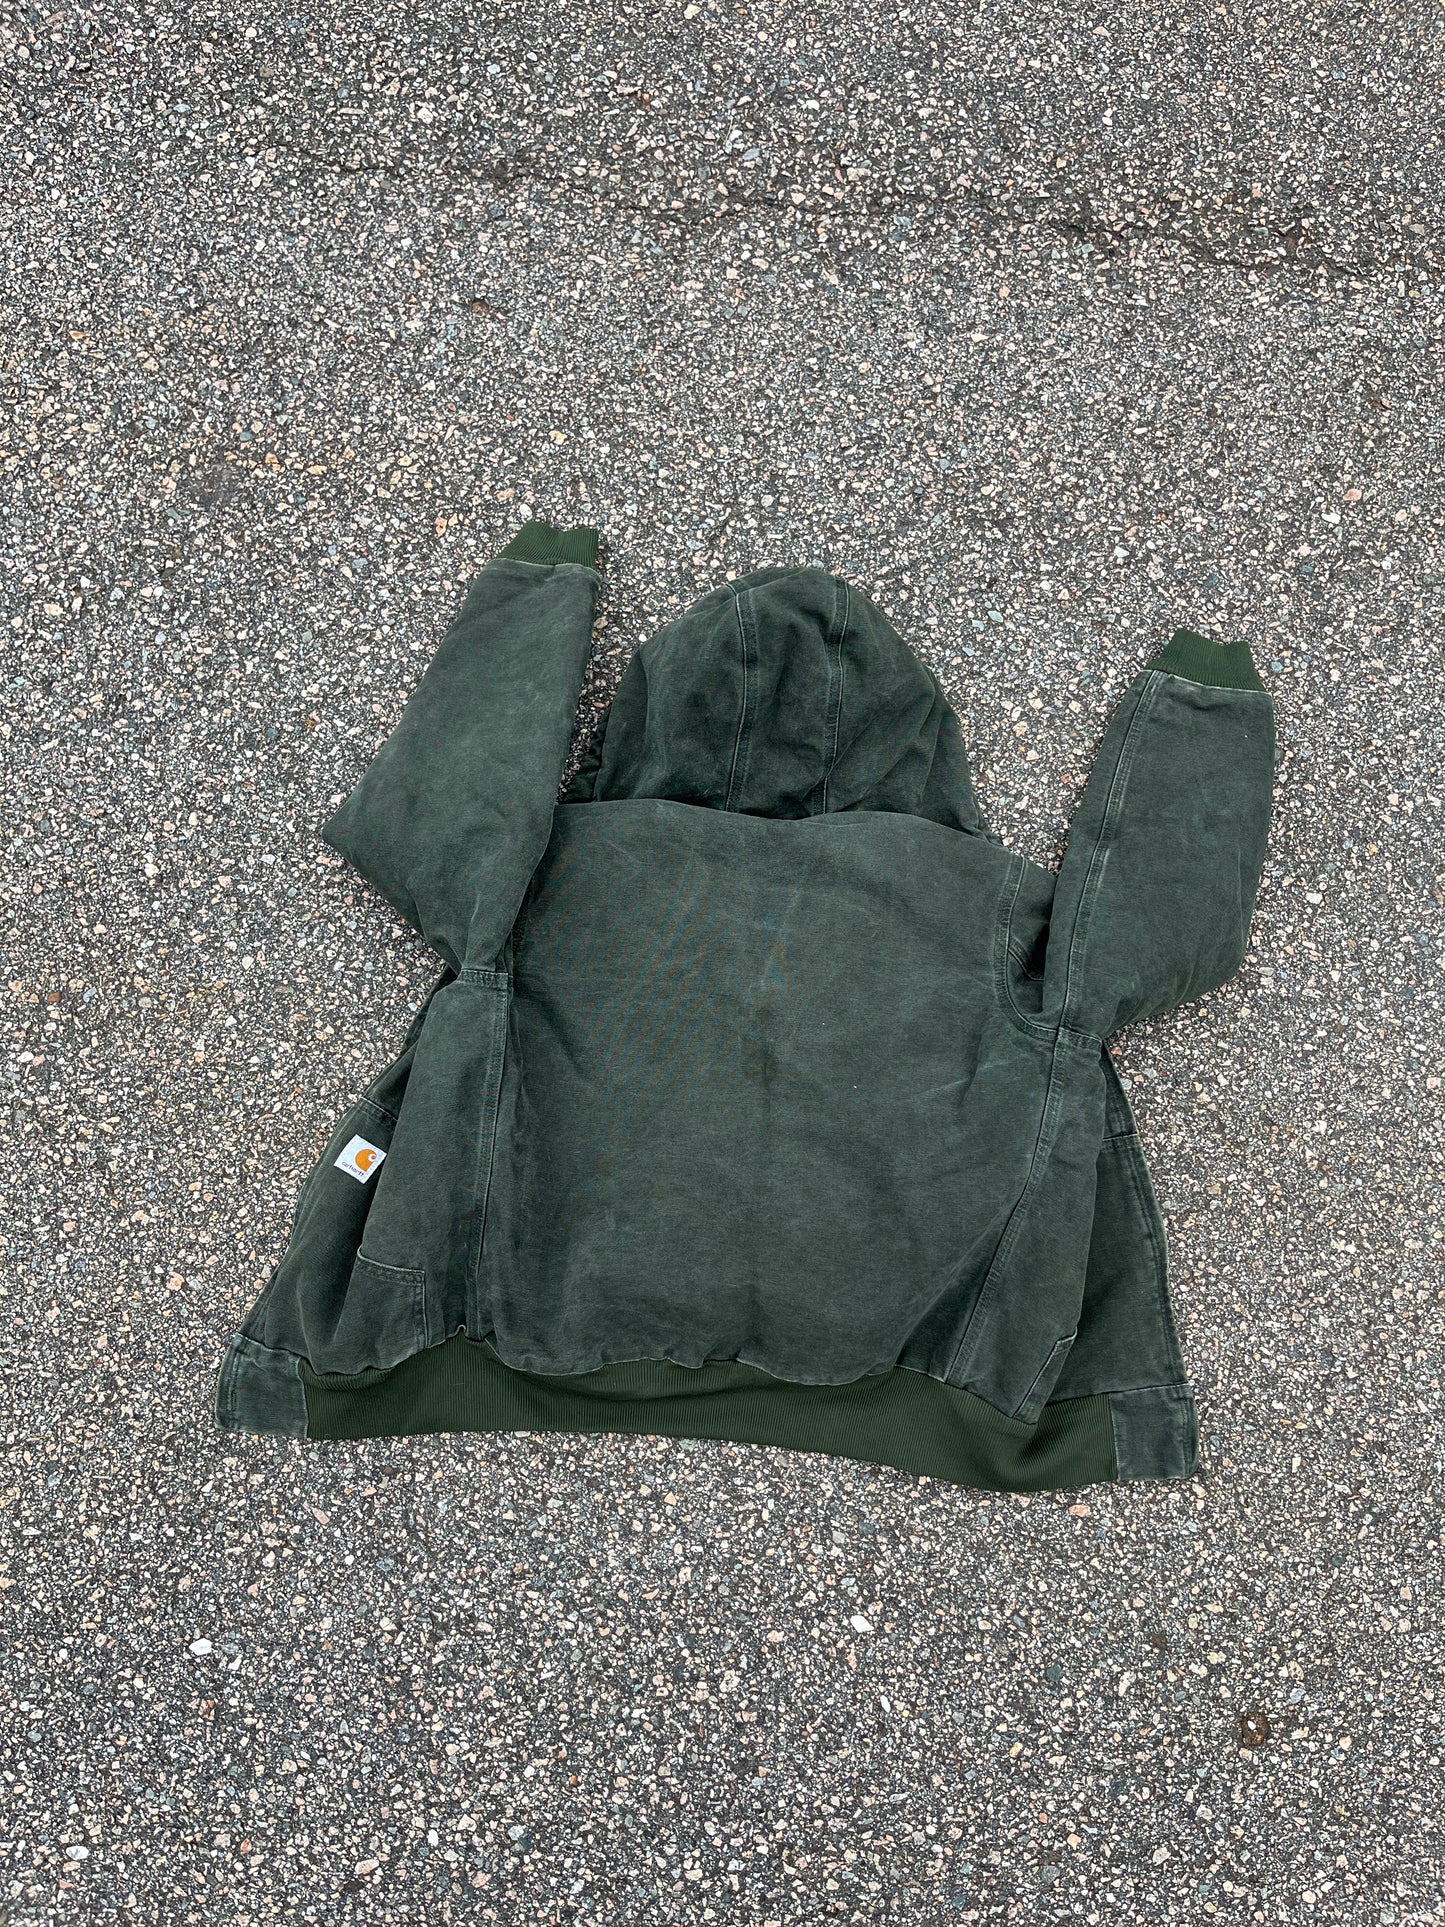 Faded Olive Green Carhartt Active Jacket - Small